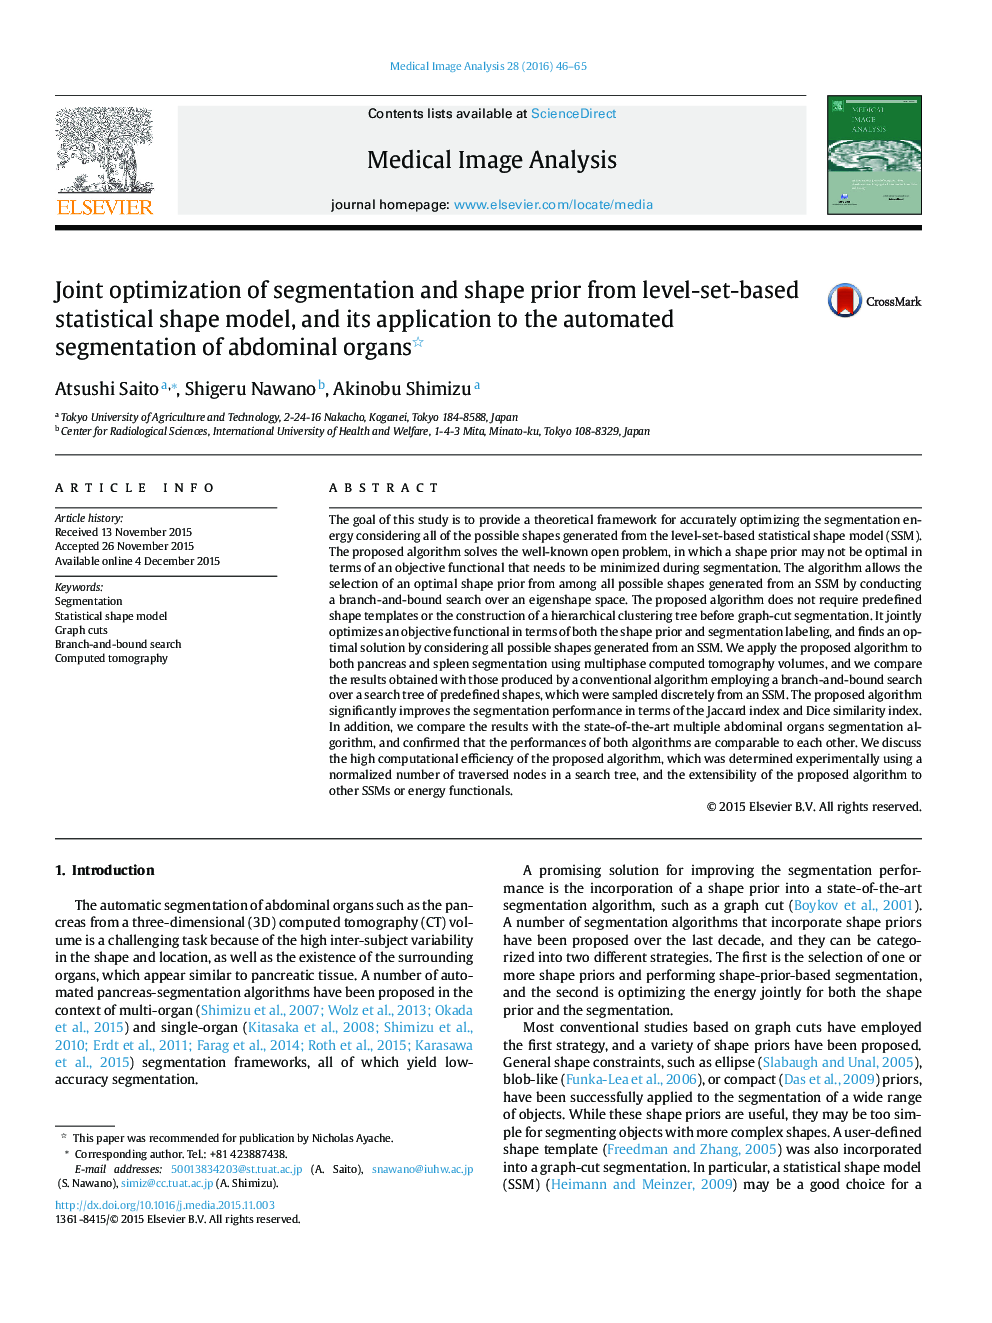 Joint optimization of segmentation and shape prior from level-set-based statistical shape model, and its application to the automated segmentation of abdominal organs 